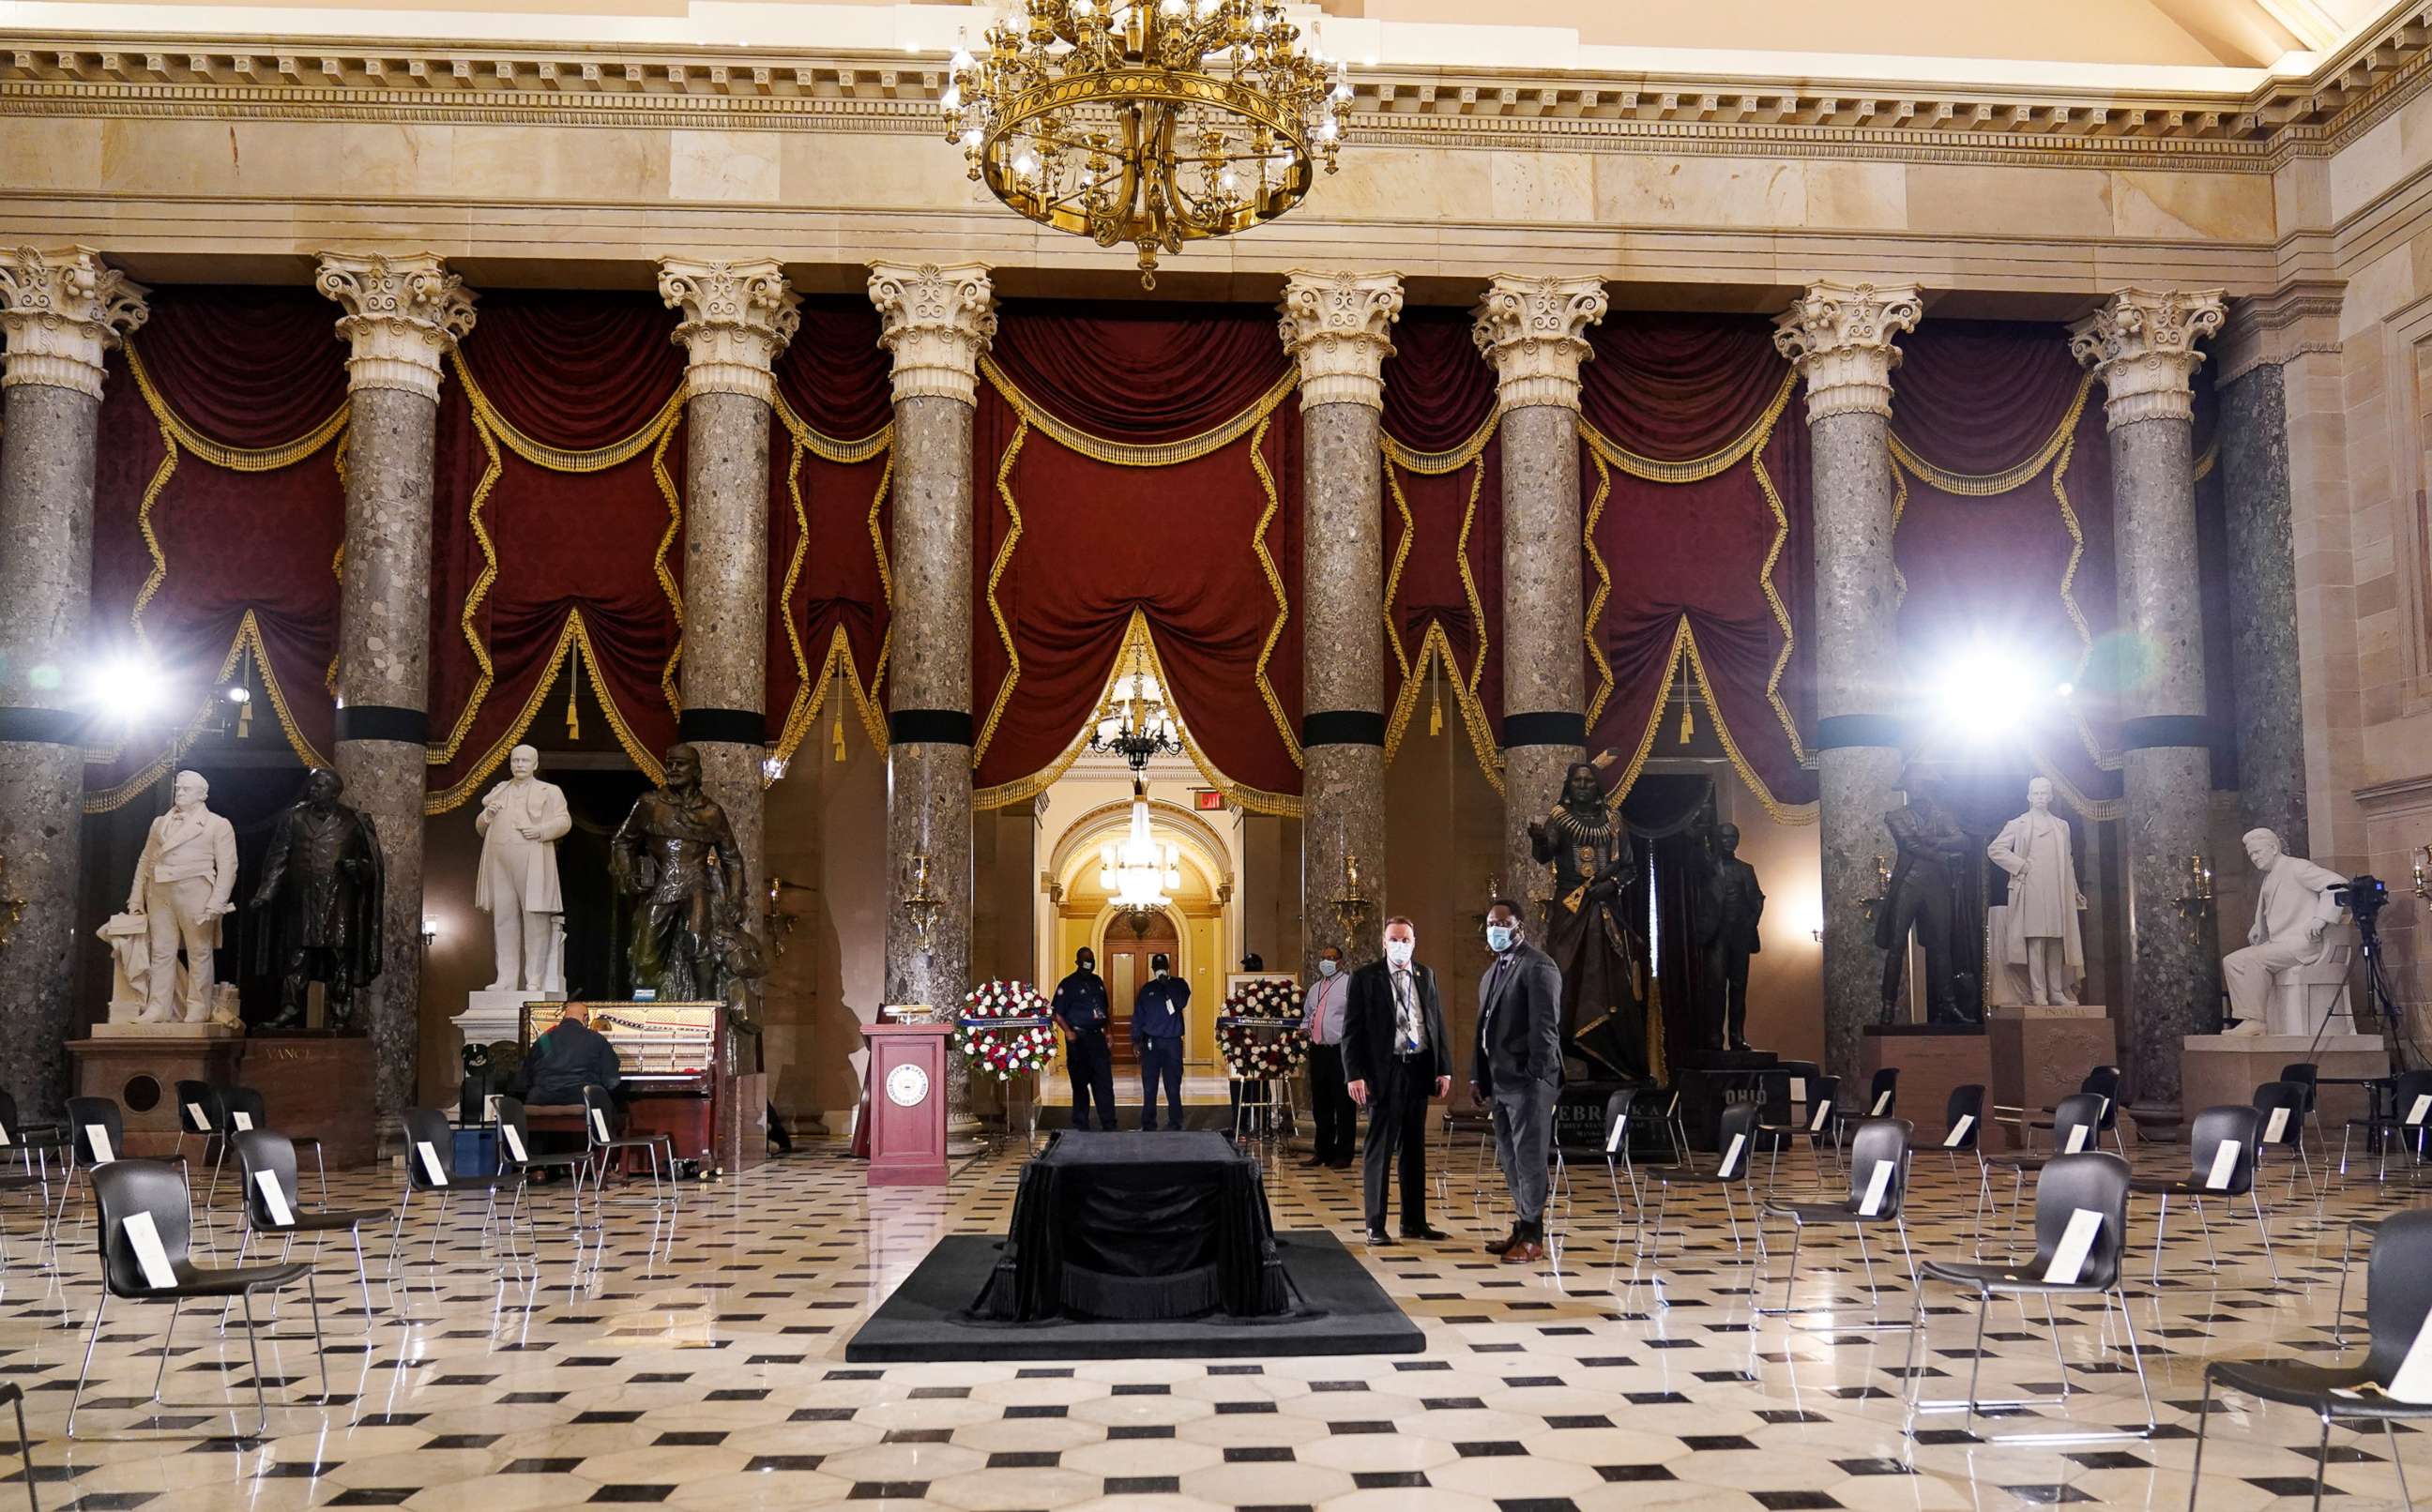 PHOTO: Final preparations are being made in Statuary Hall of the U.S. Capitol for Justice Ruth Bader Ginsburg, who will lie in state later today, in Washington, U.S., September 25, 2020. Alex Brandon/Pool via REUTERS